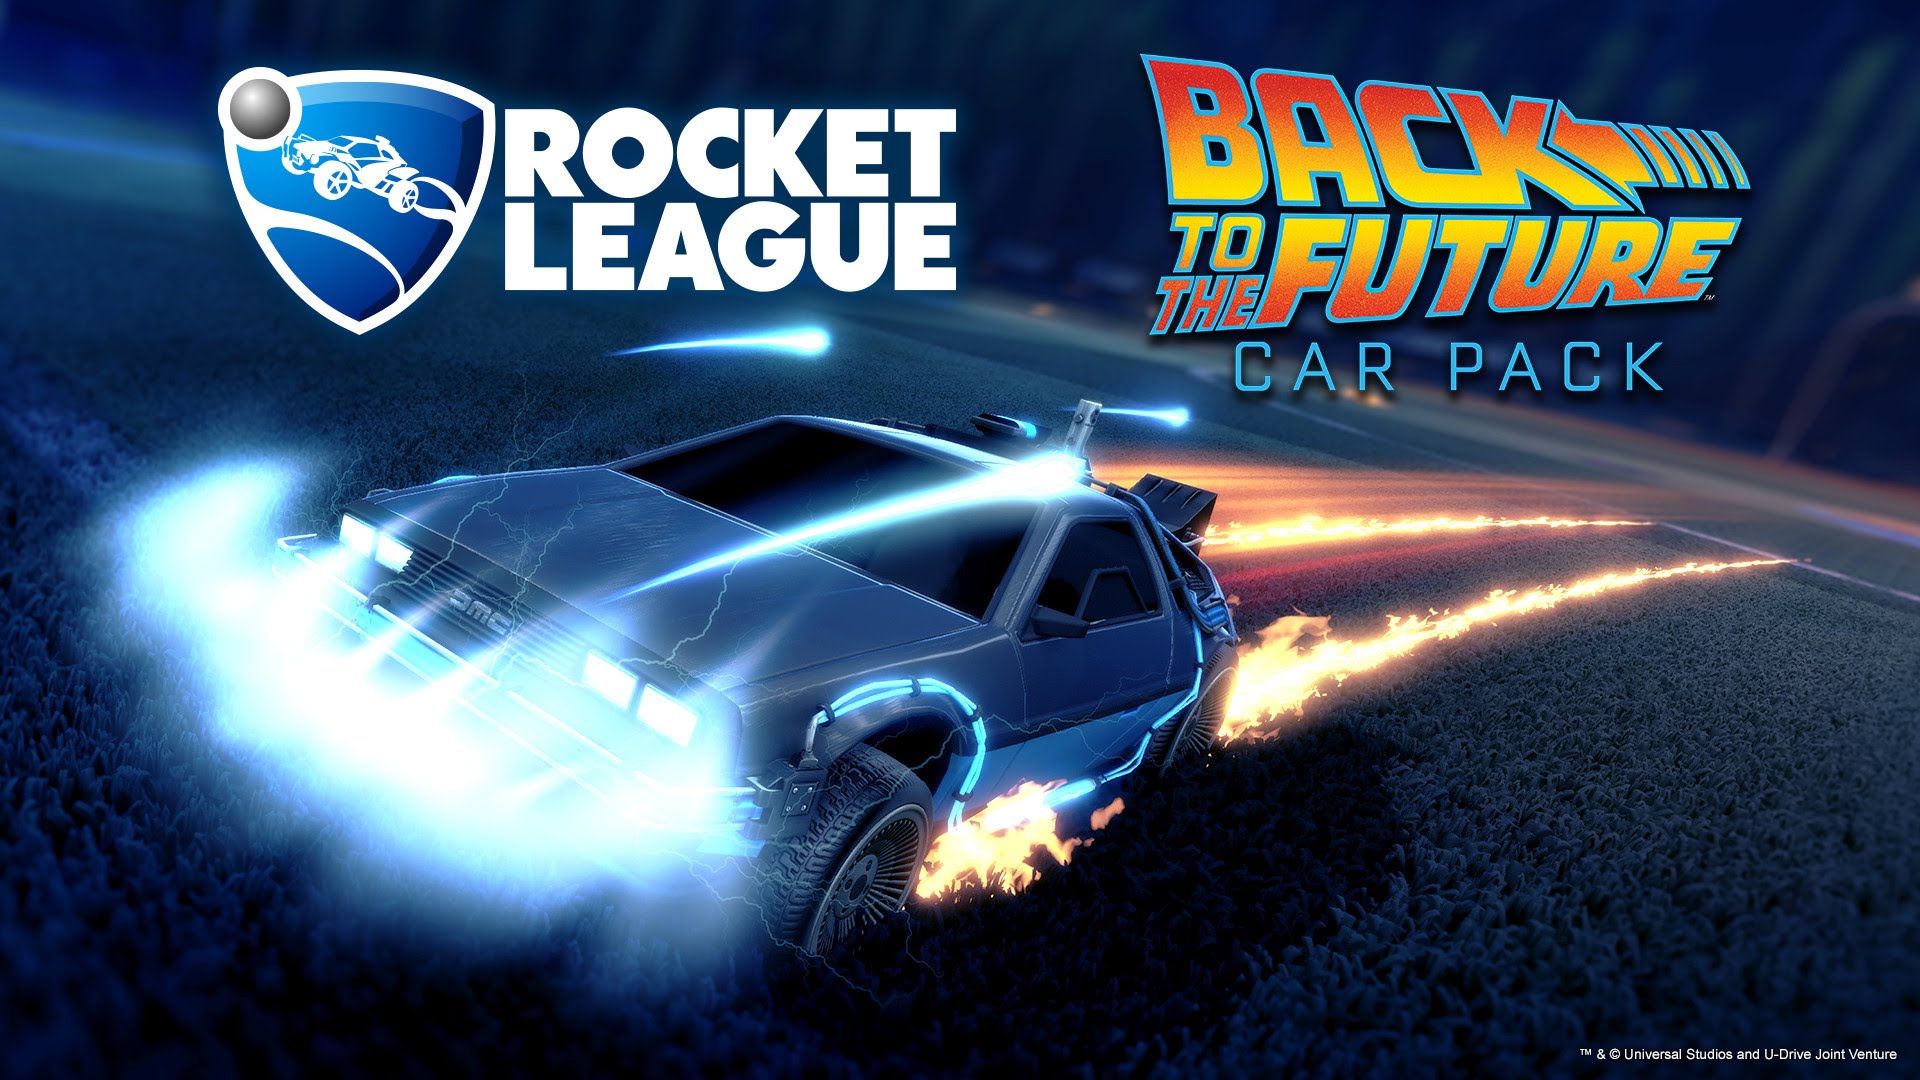 On October 21, The Delorean Comes To Rocket League